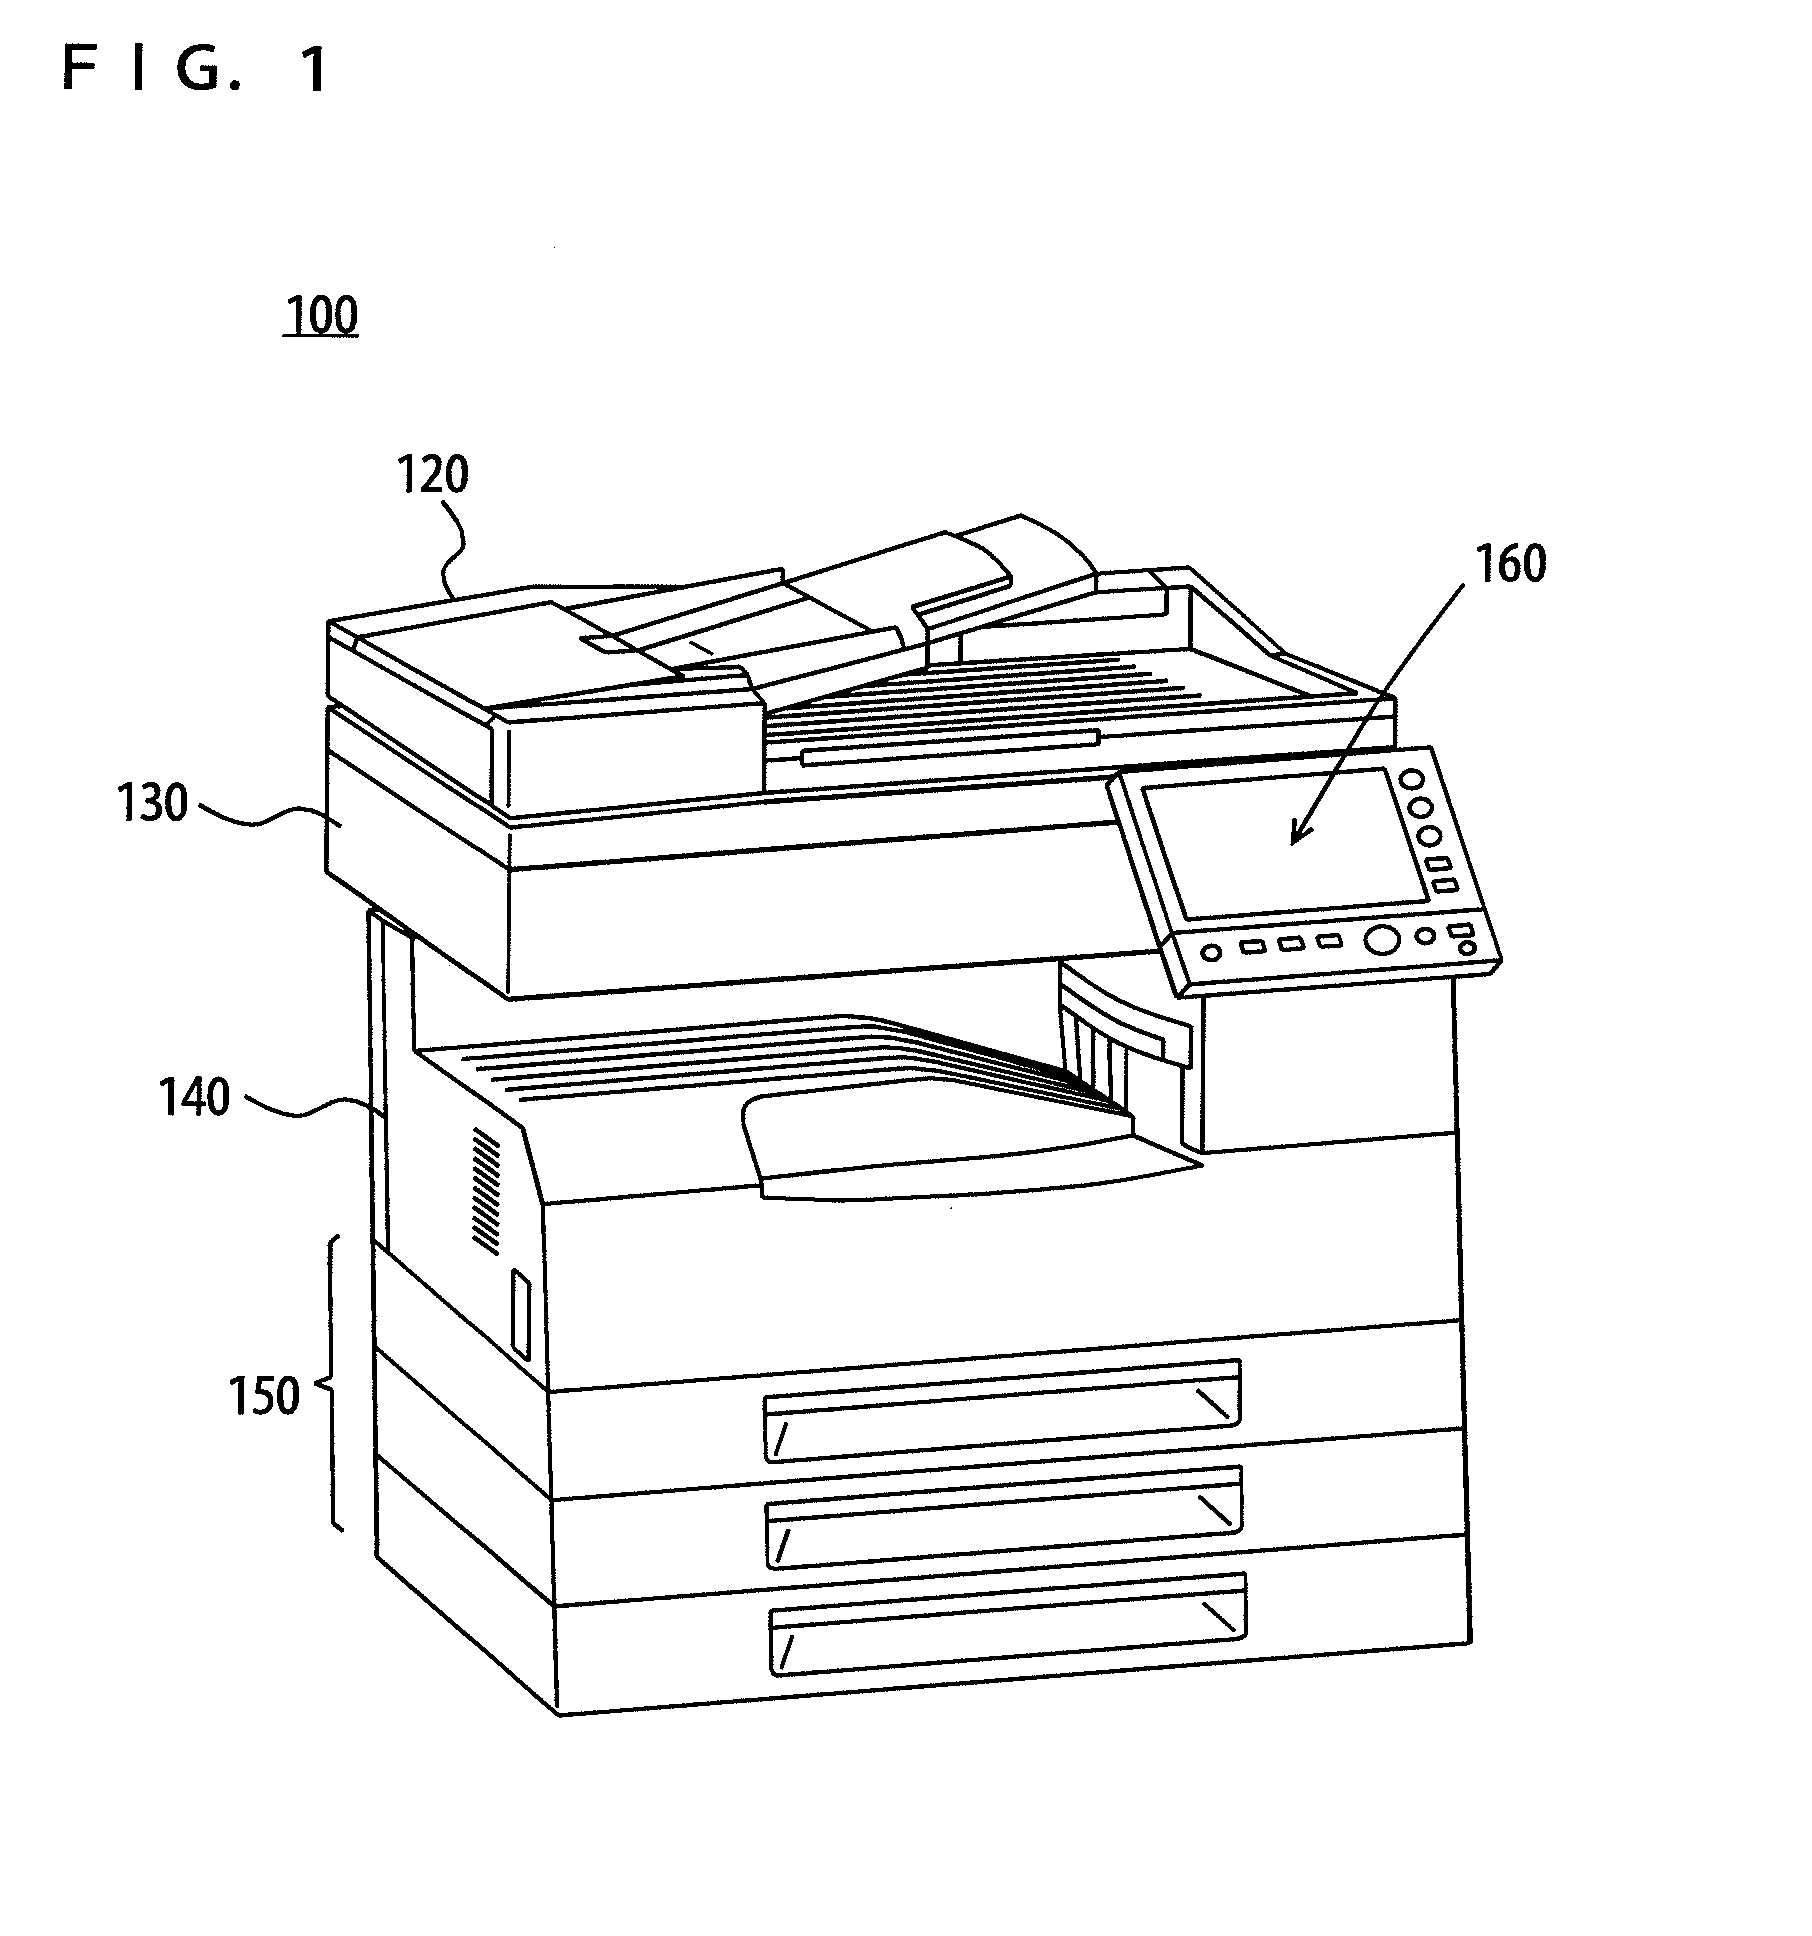 Image forming apparatus, display method, and non-transitory computer-readable recording medium encoded with display program